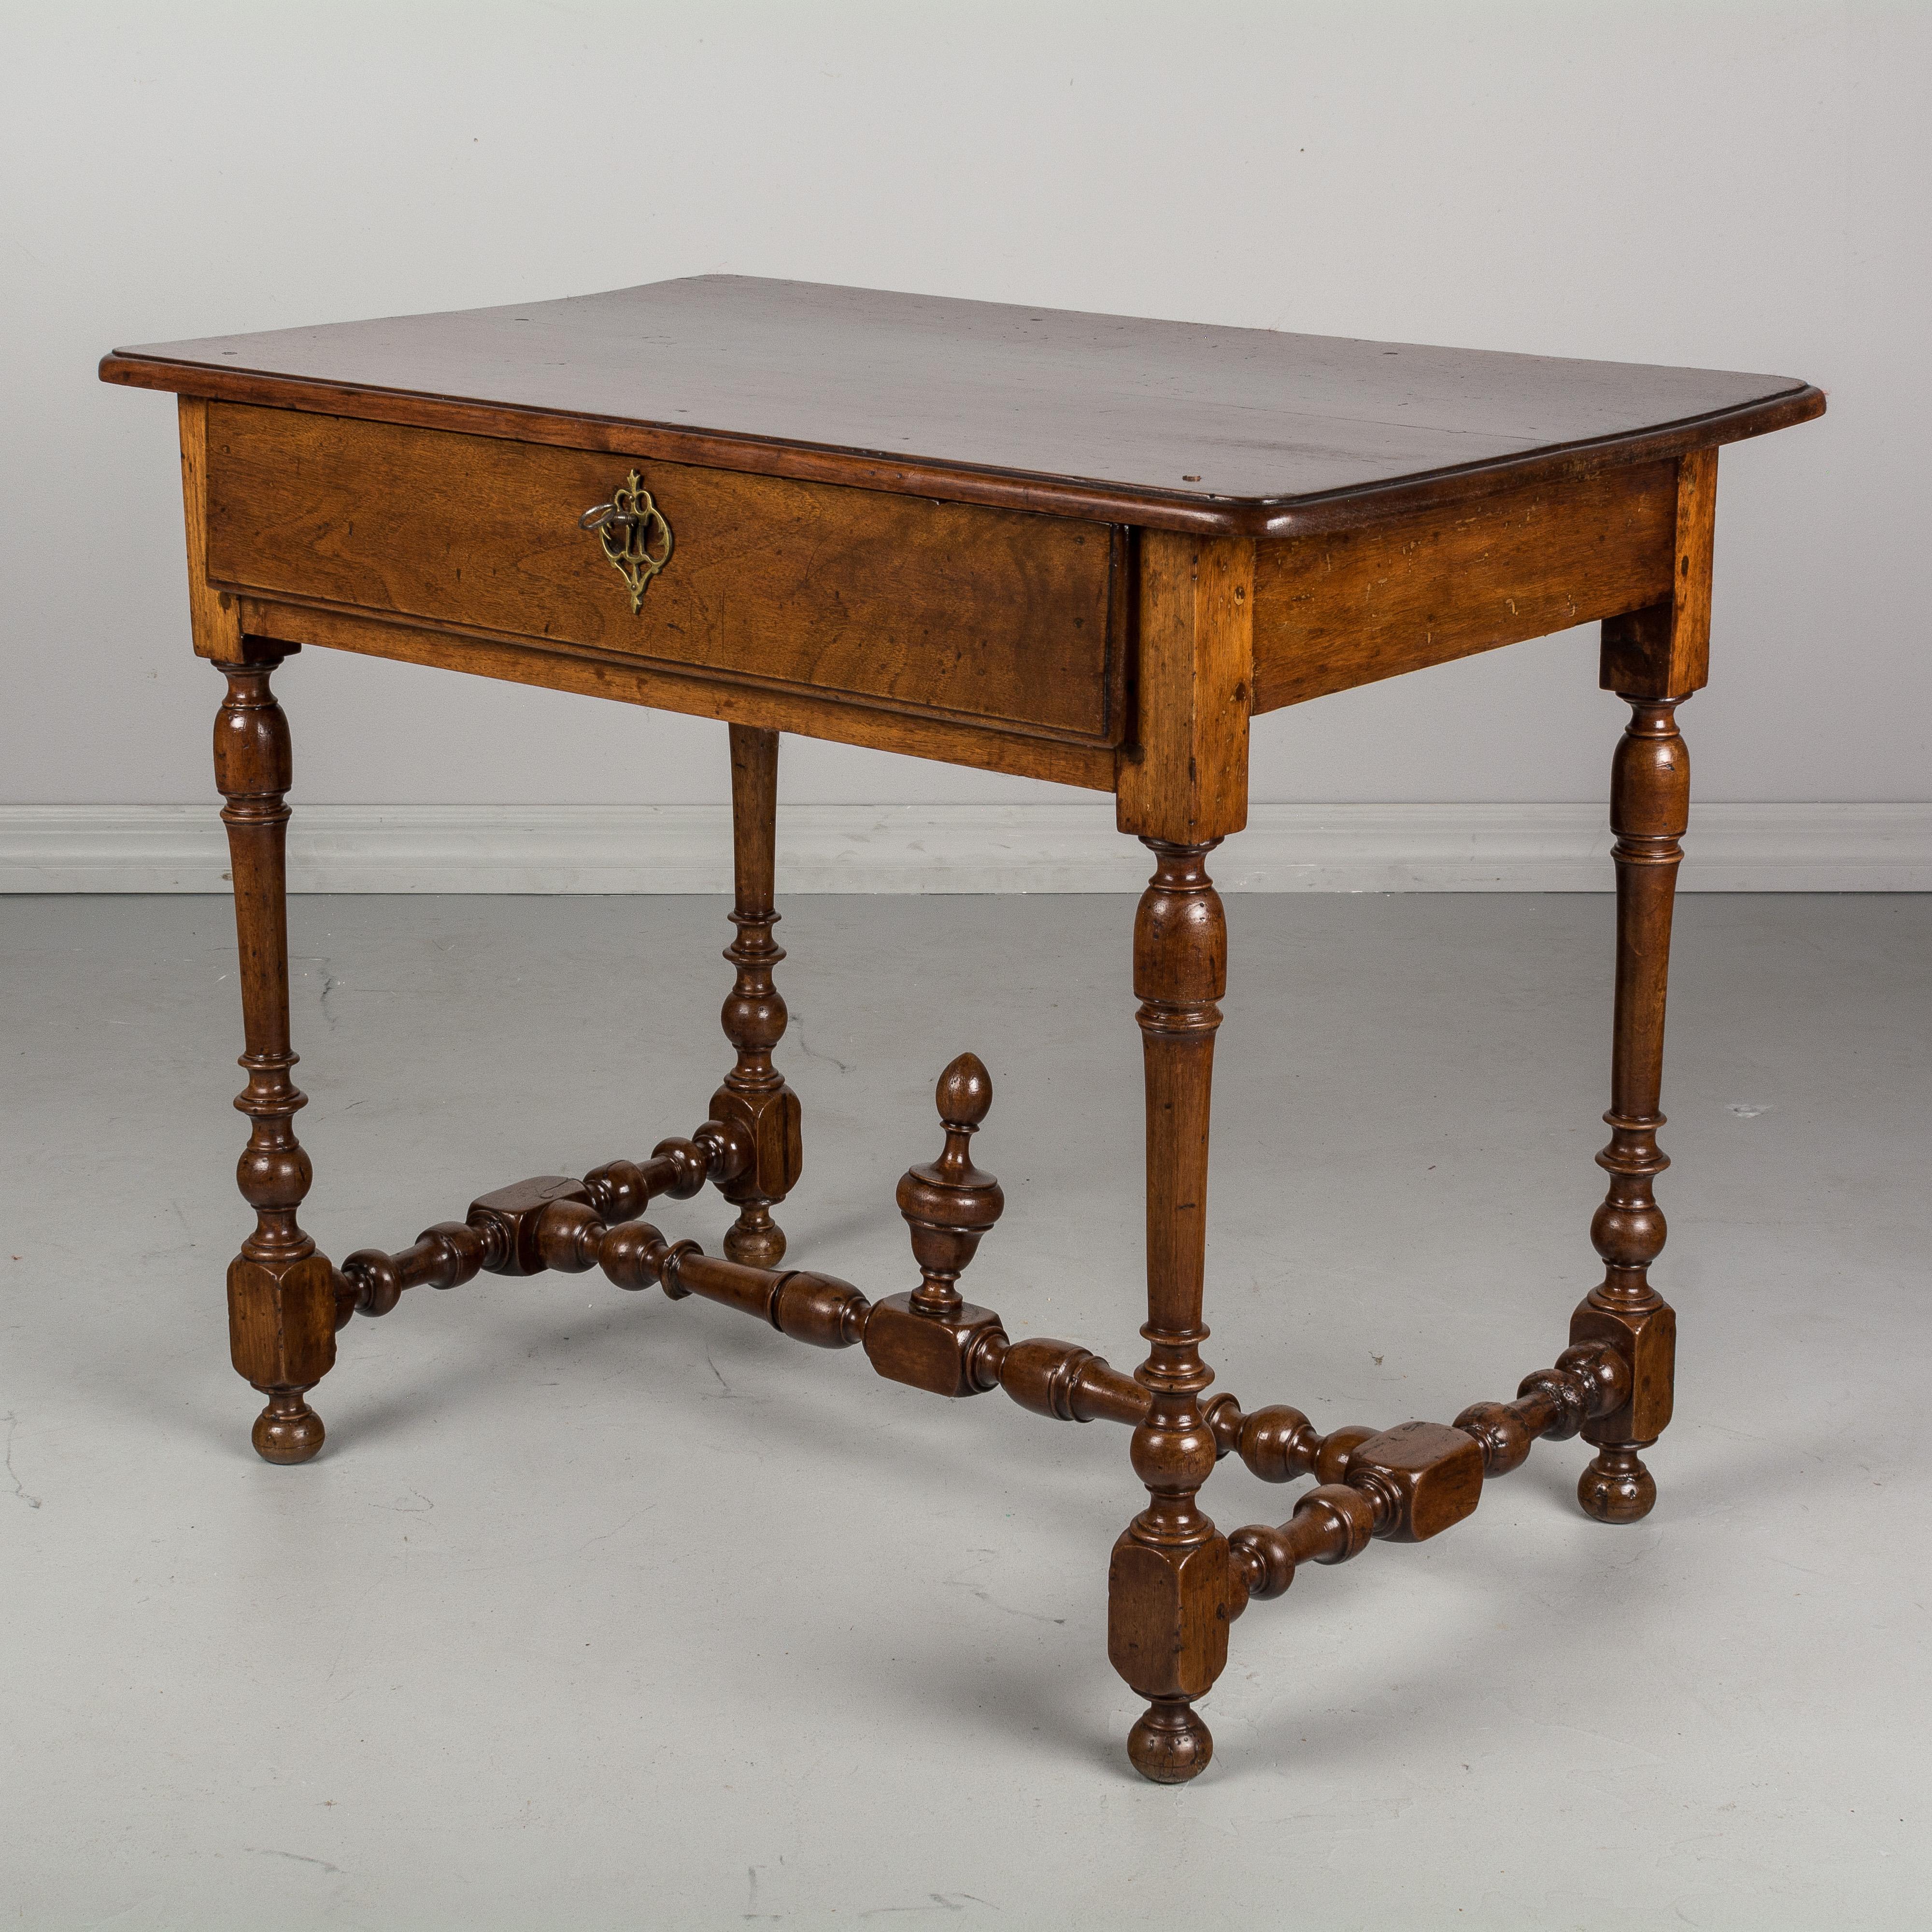 An early 19th century Louis XIII style French side table made of solid walnut with a large dovetailed drawer. Fine turned legs and stretcher with finial. Top is made from a single plank. Lock and key are present, but not in working order. Pegged